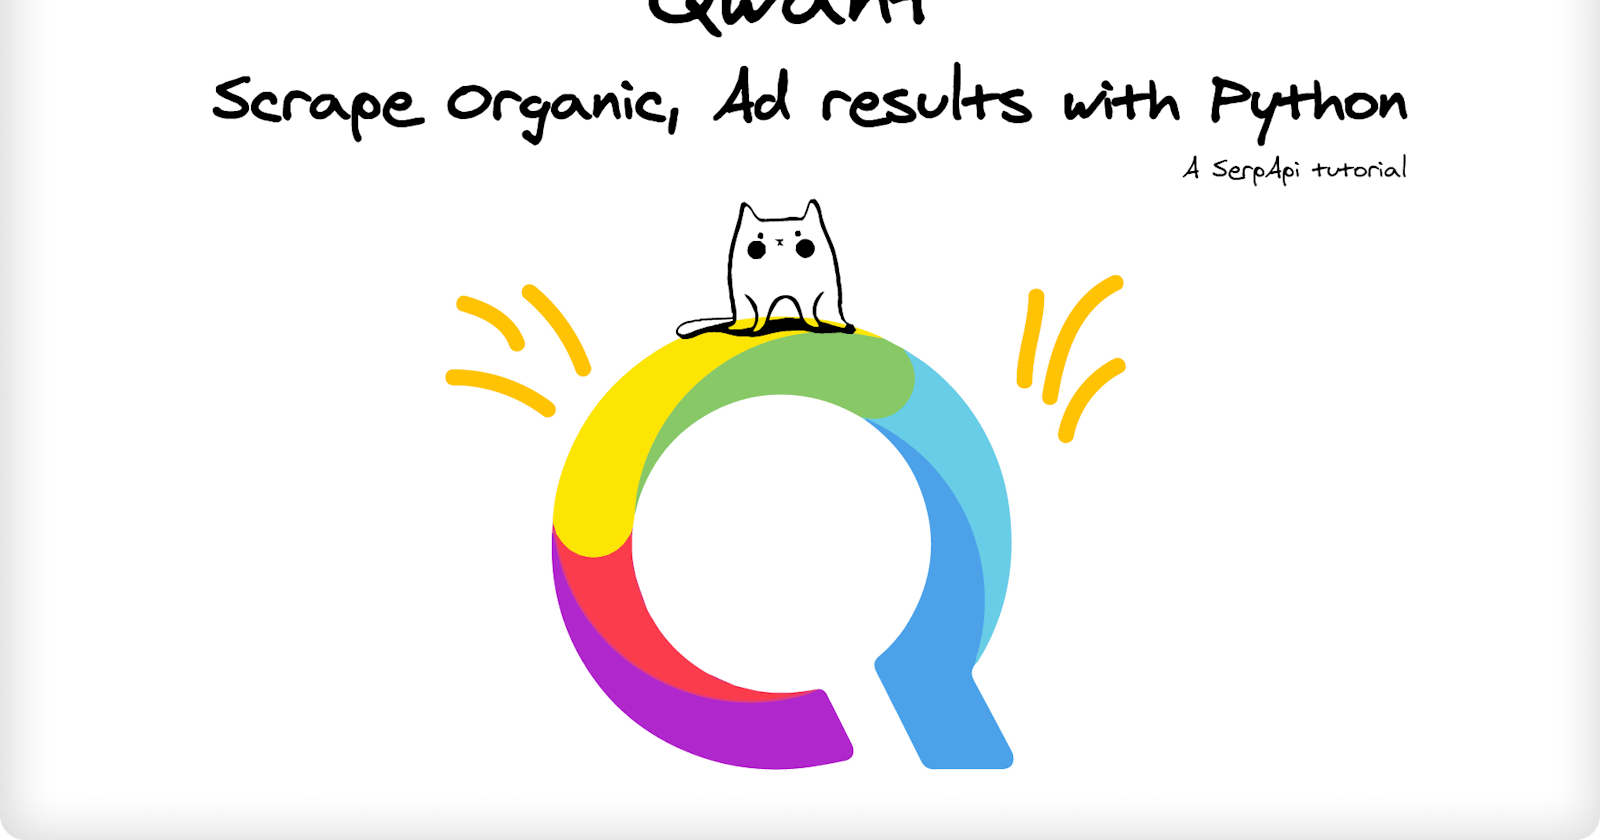 Scrape Qwant Organic and Ad Results using Python